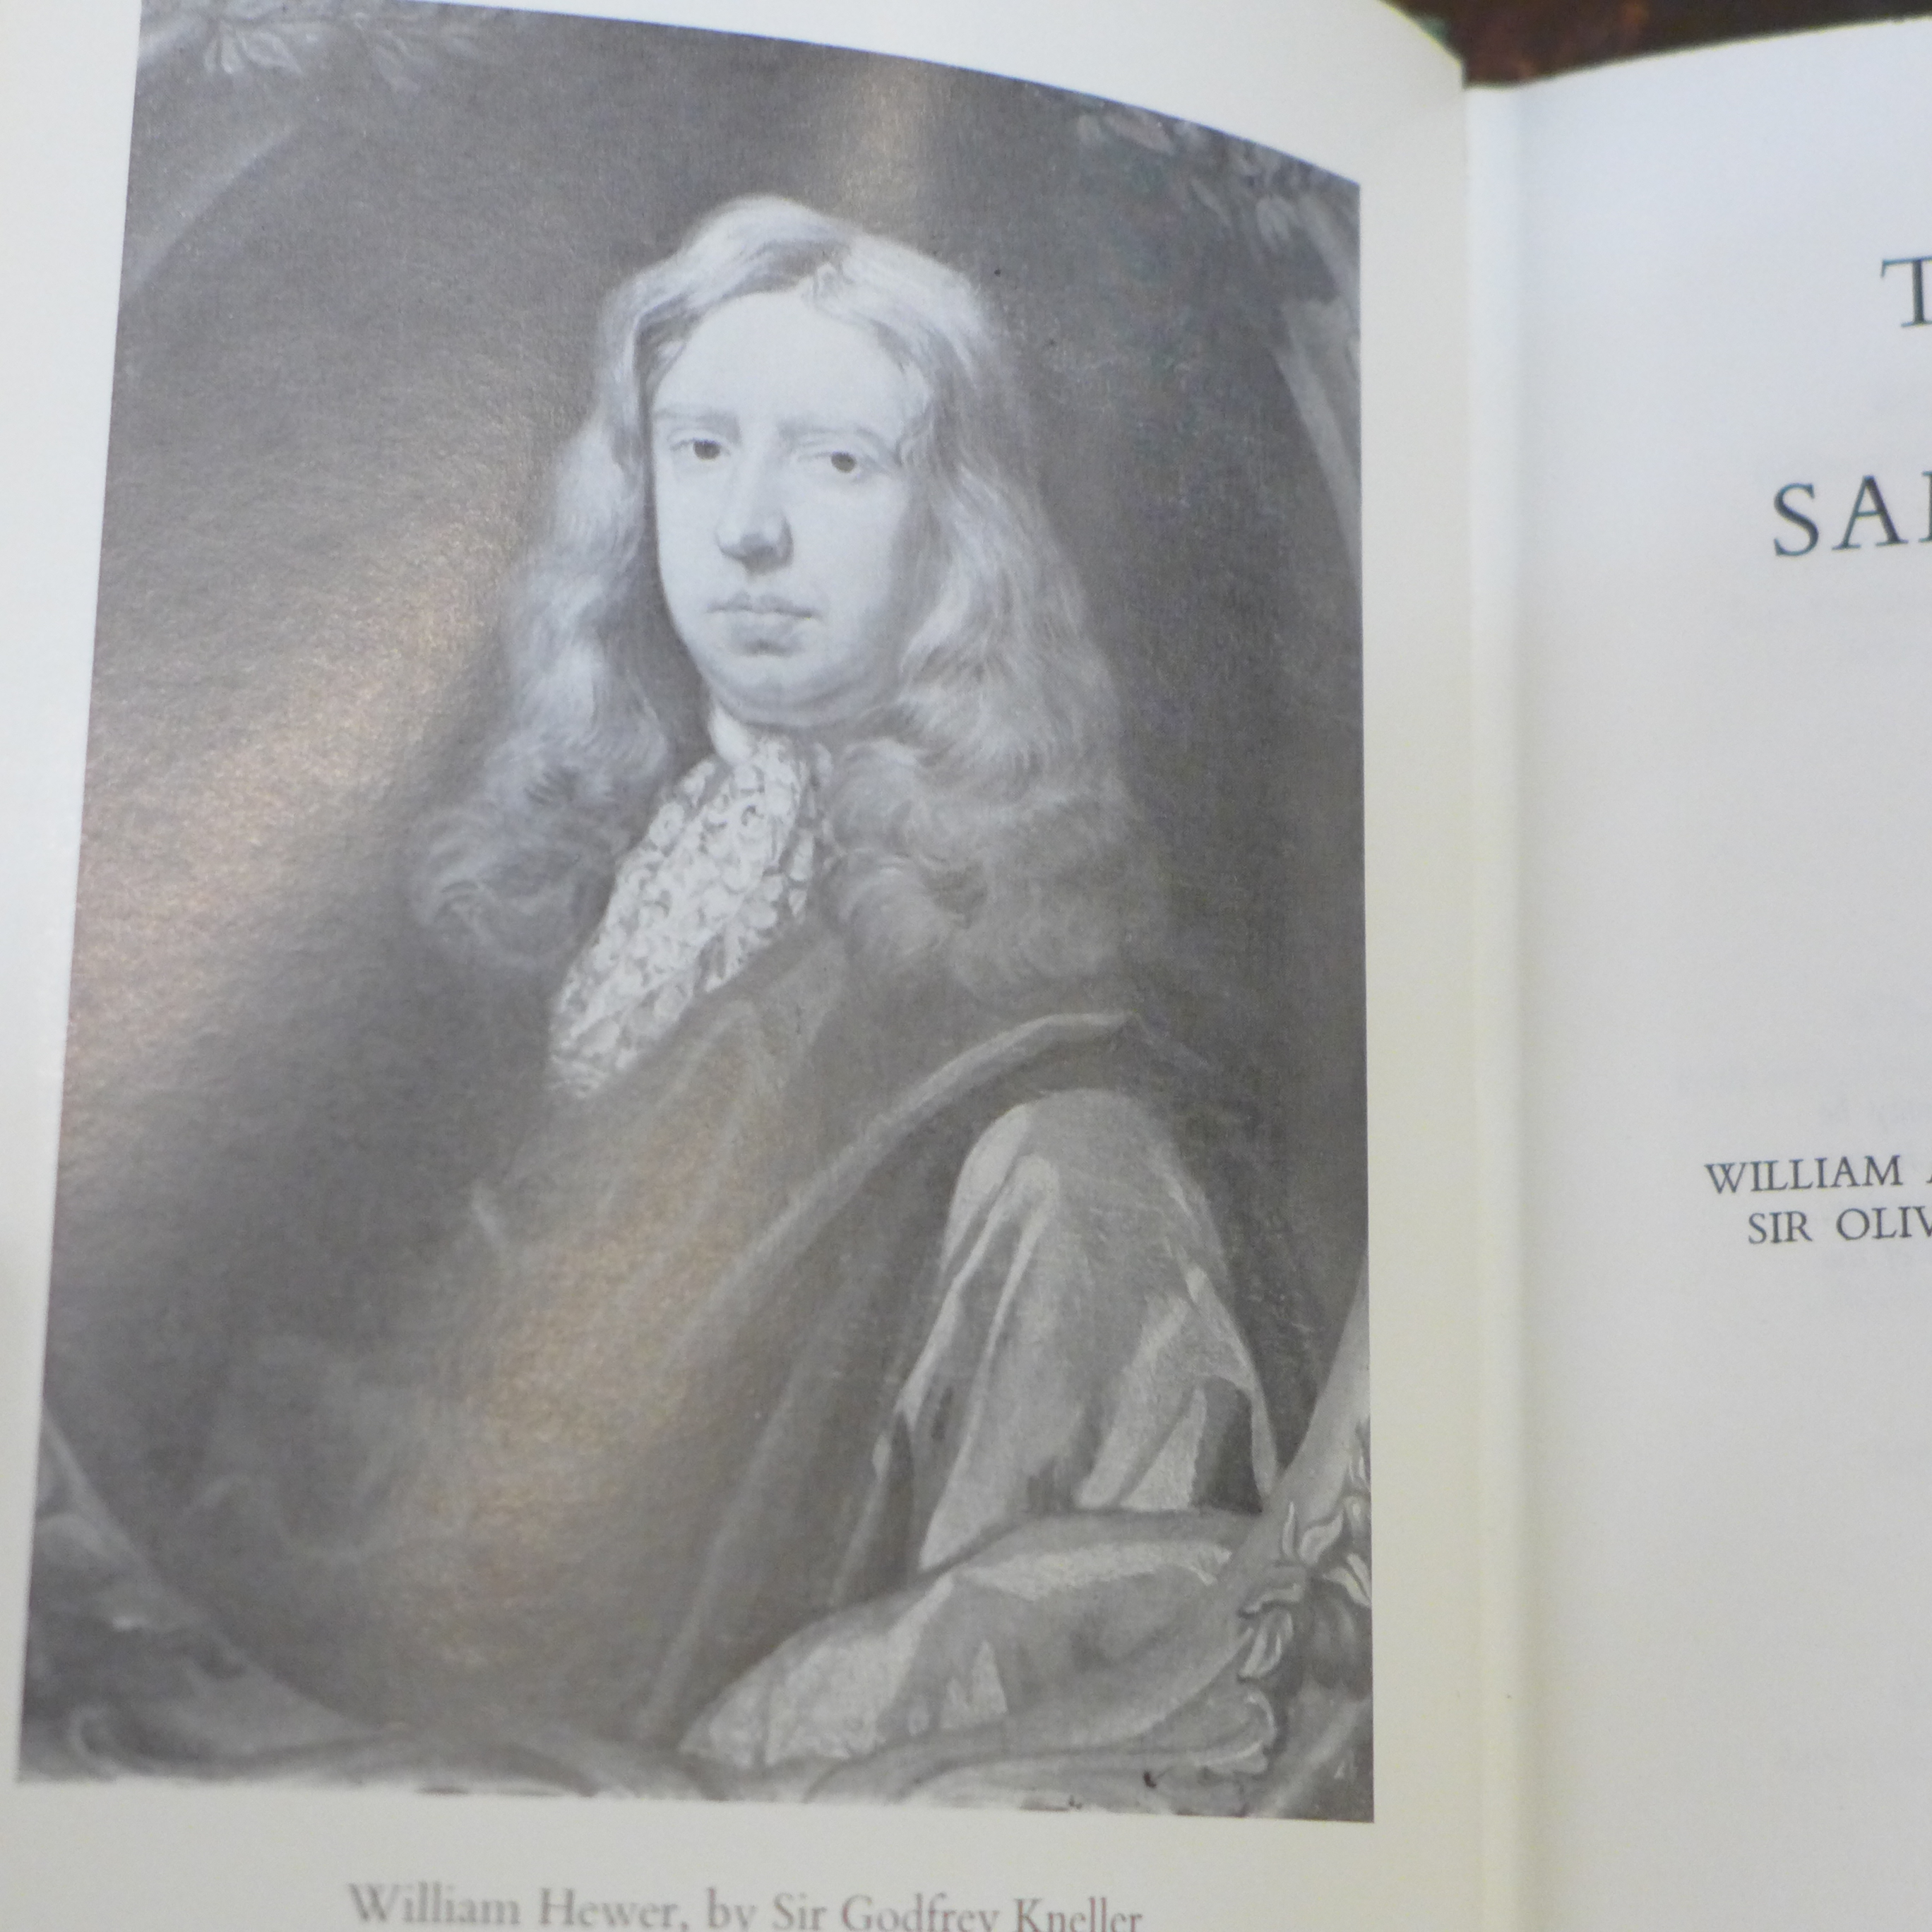 The Diary of Samuel Pepys, no. 1-11, published 1970s/80s by G Bell & Sons Ltd - Image 8 of 8